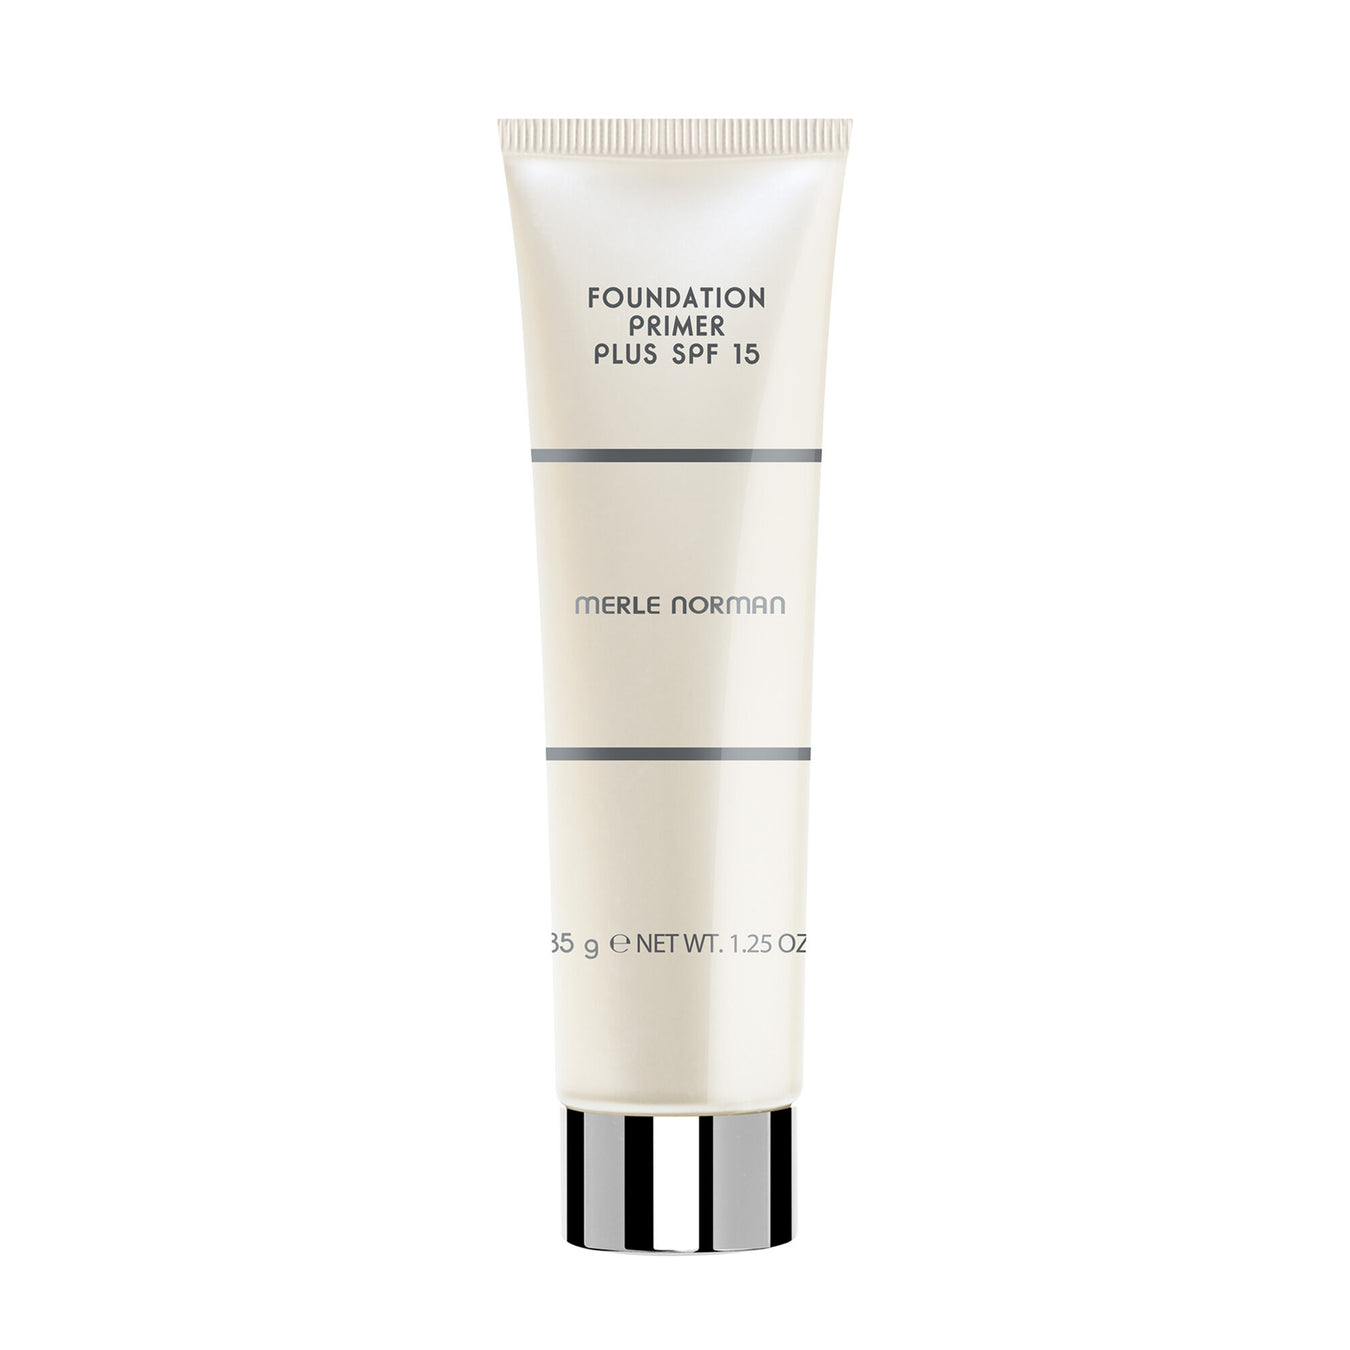 Help your makeup last from morning til night with the right primer!